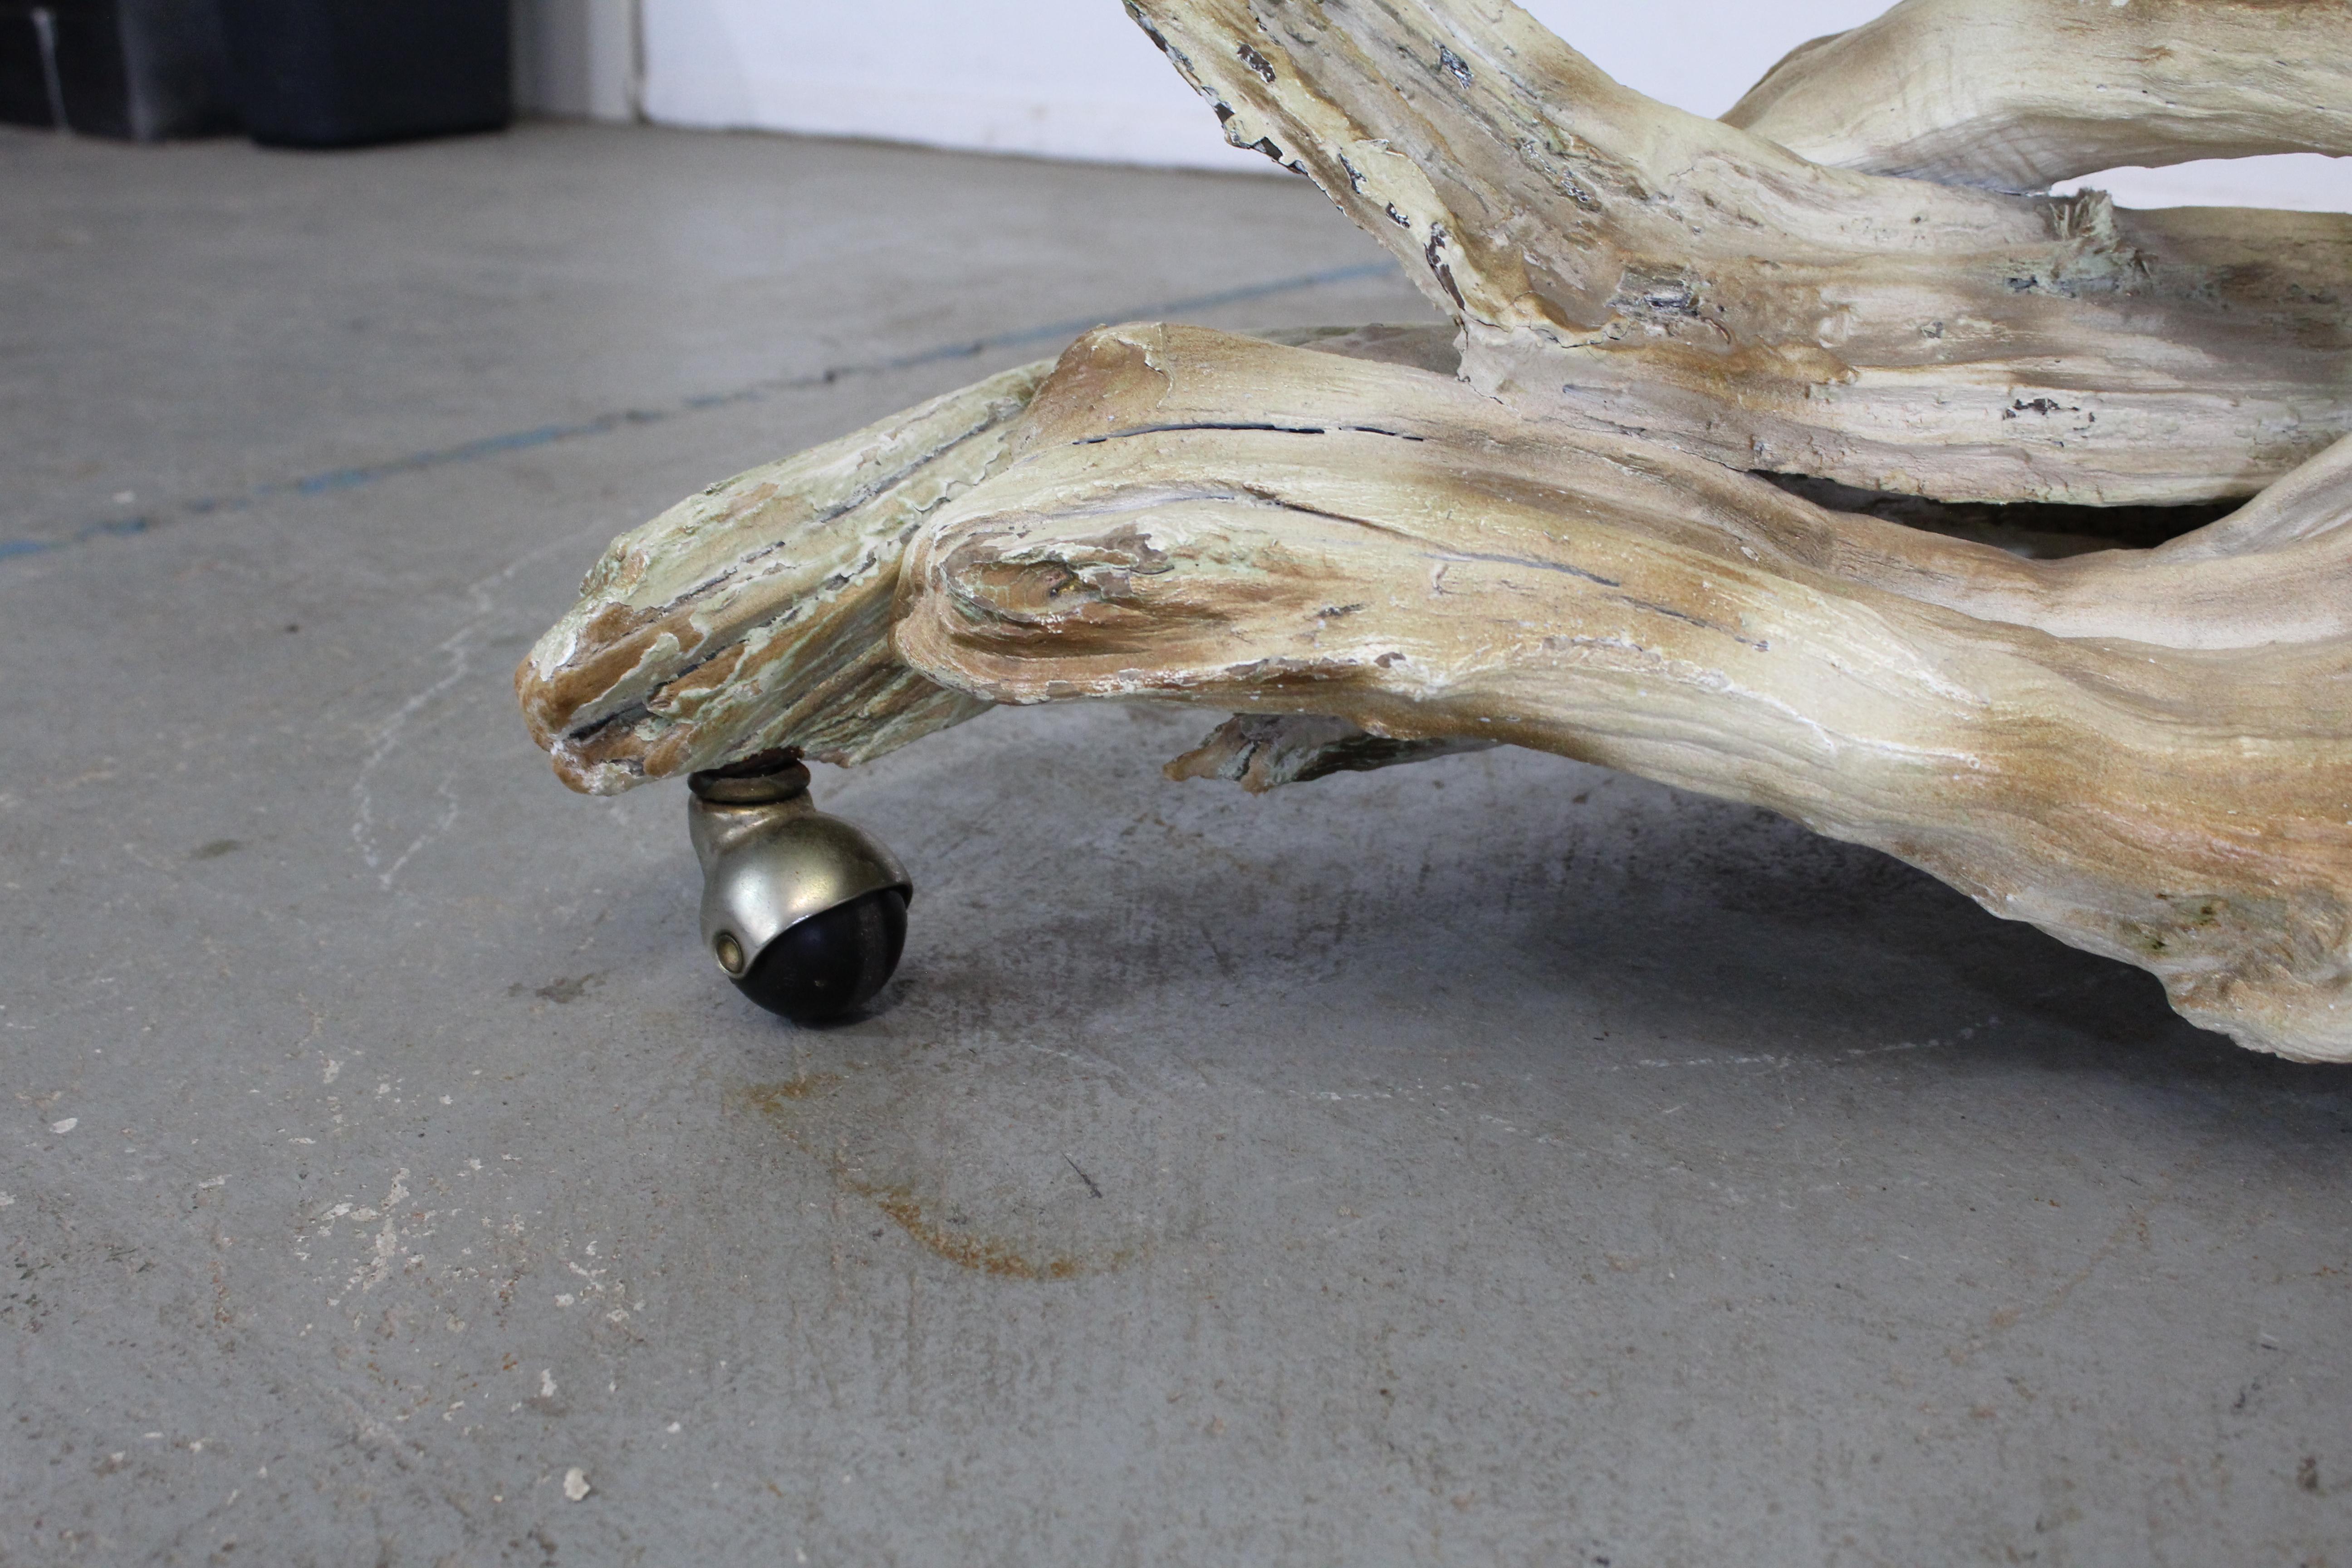 Vintage Mid-Century Modern Amorphous/Biomorphic Glass Driftwood Coffee Table For Sale 2